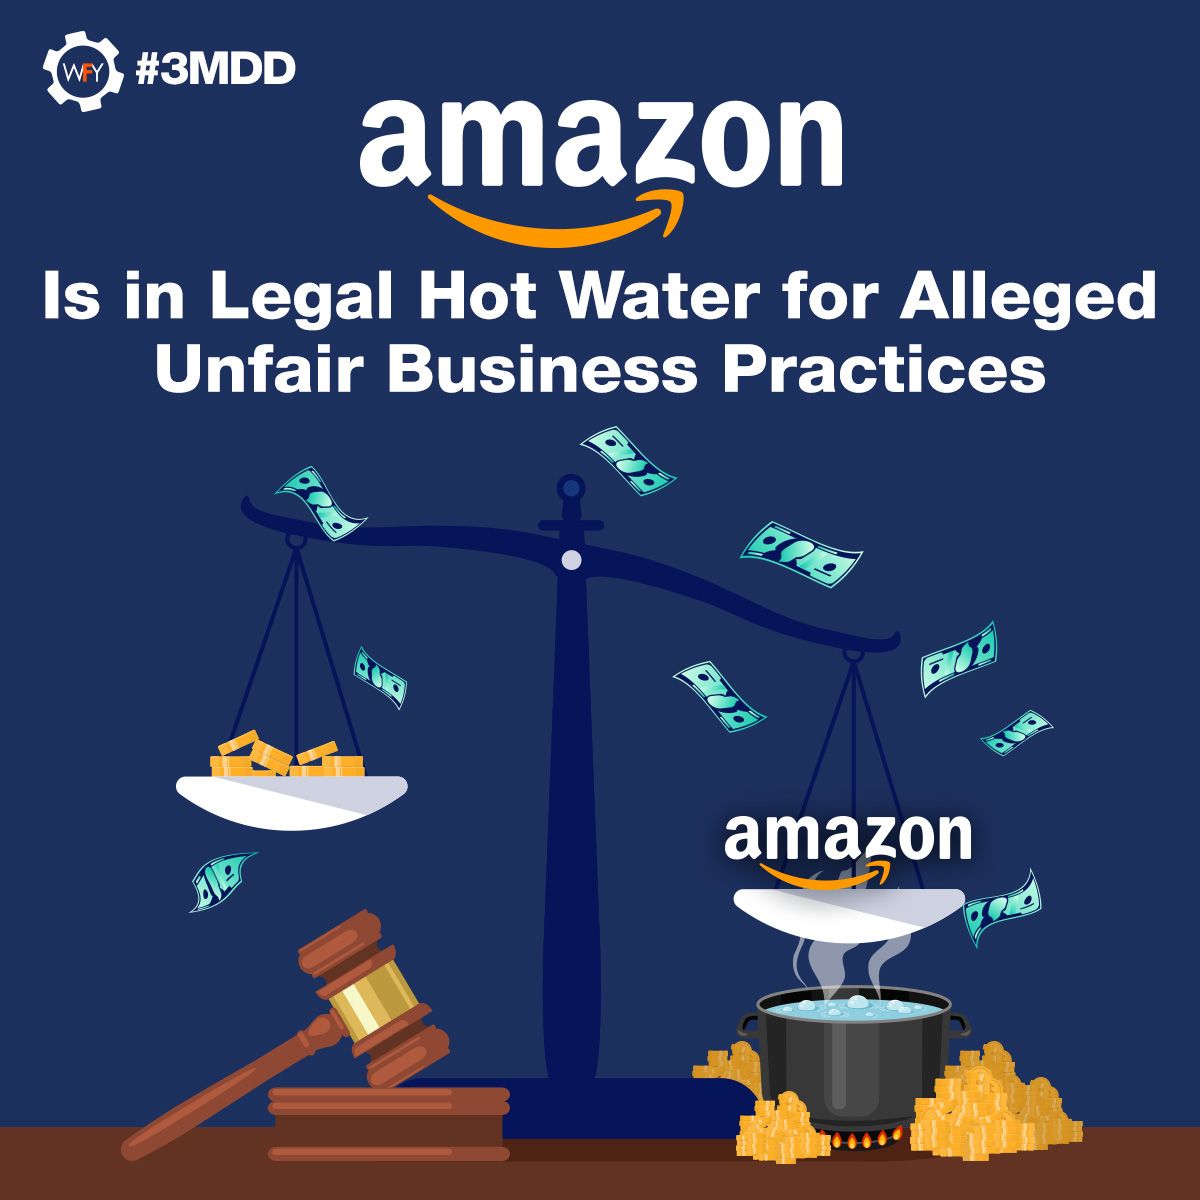 Amazon Is in Legal Hot Water for Alleged Unfair Business Practices